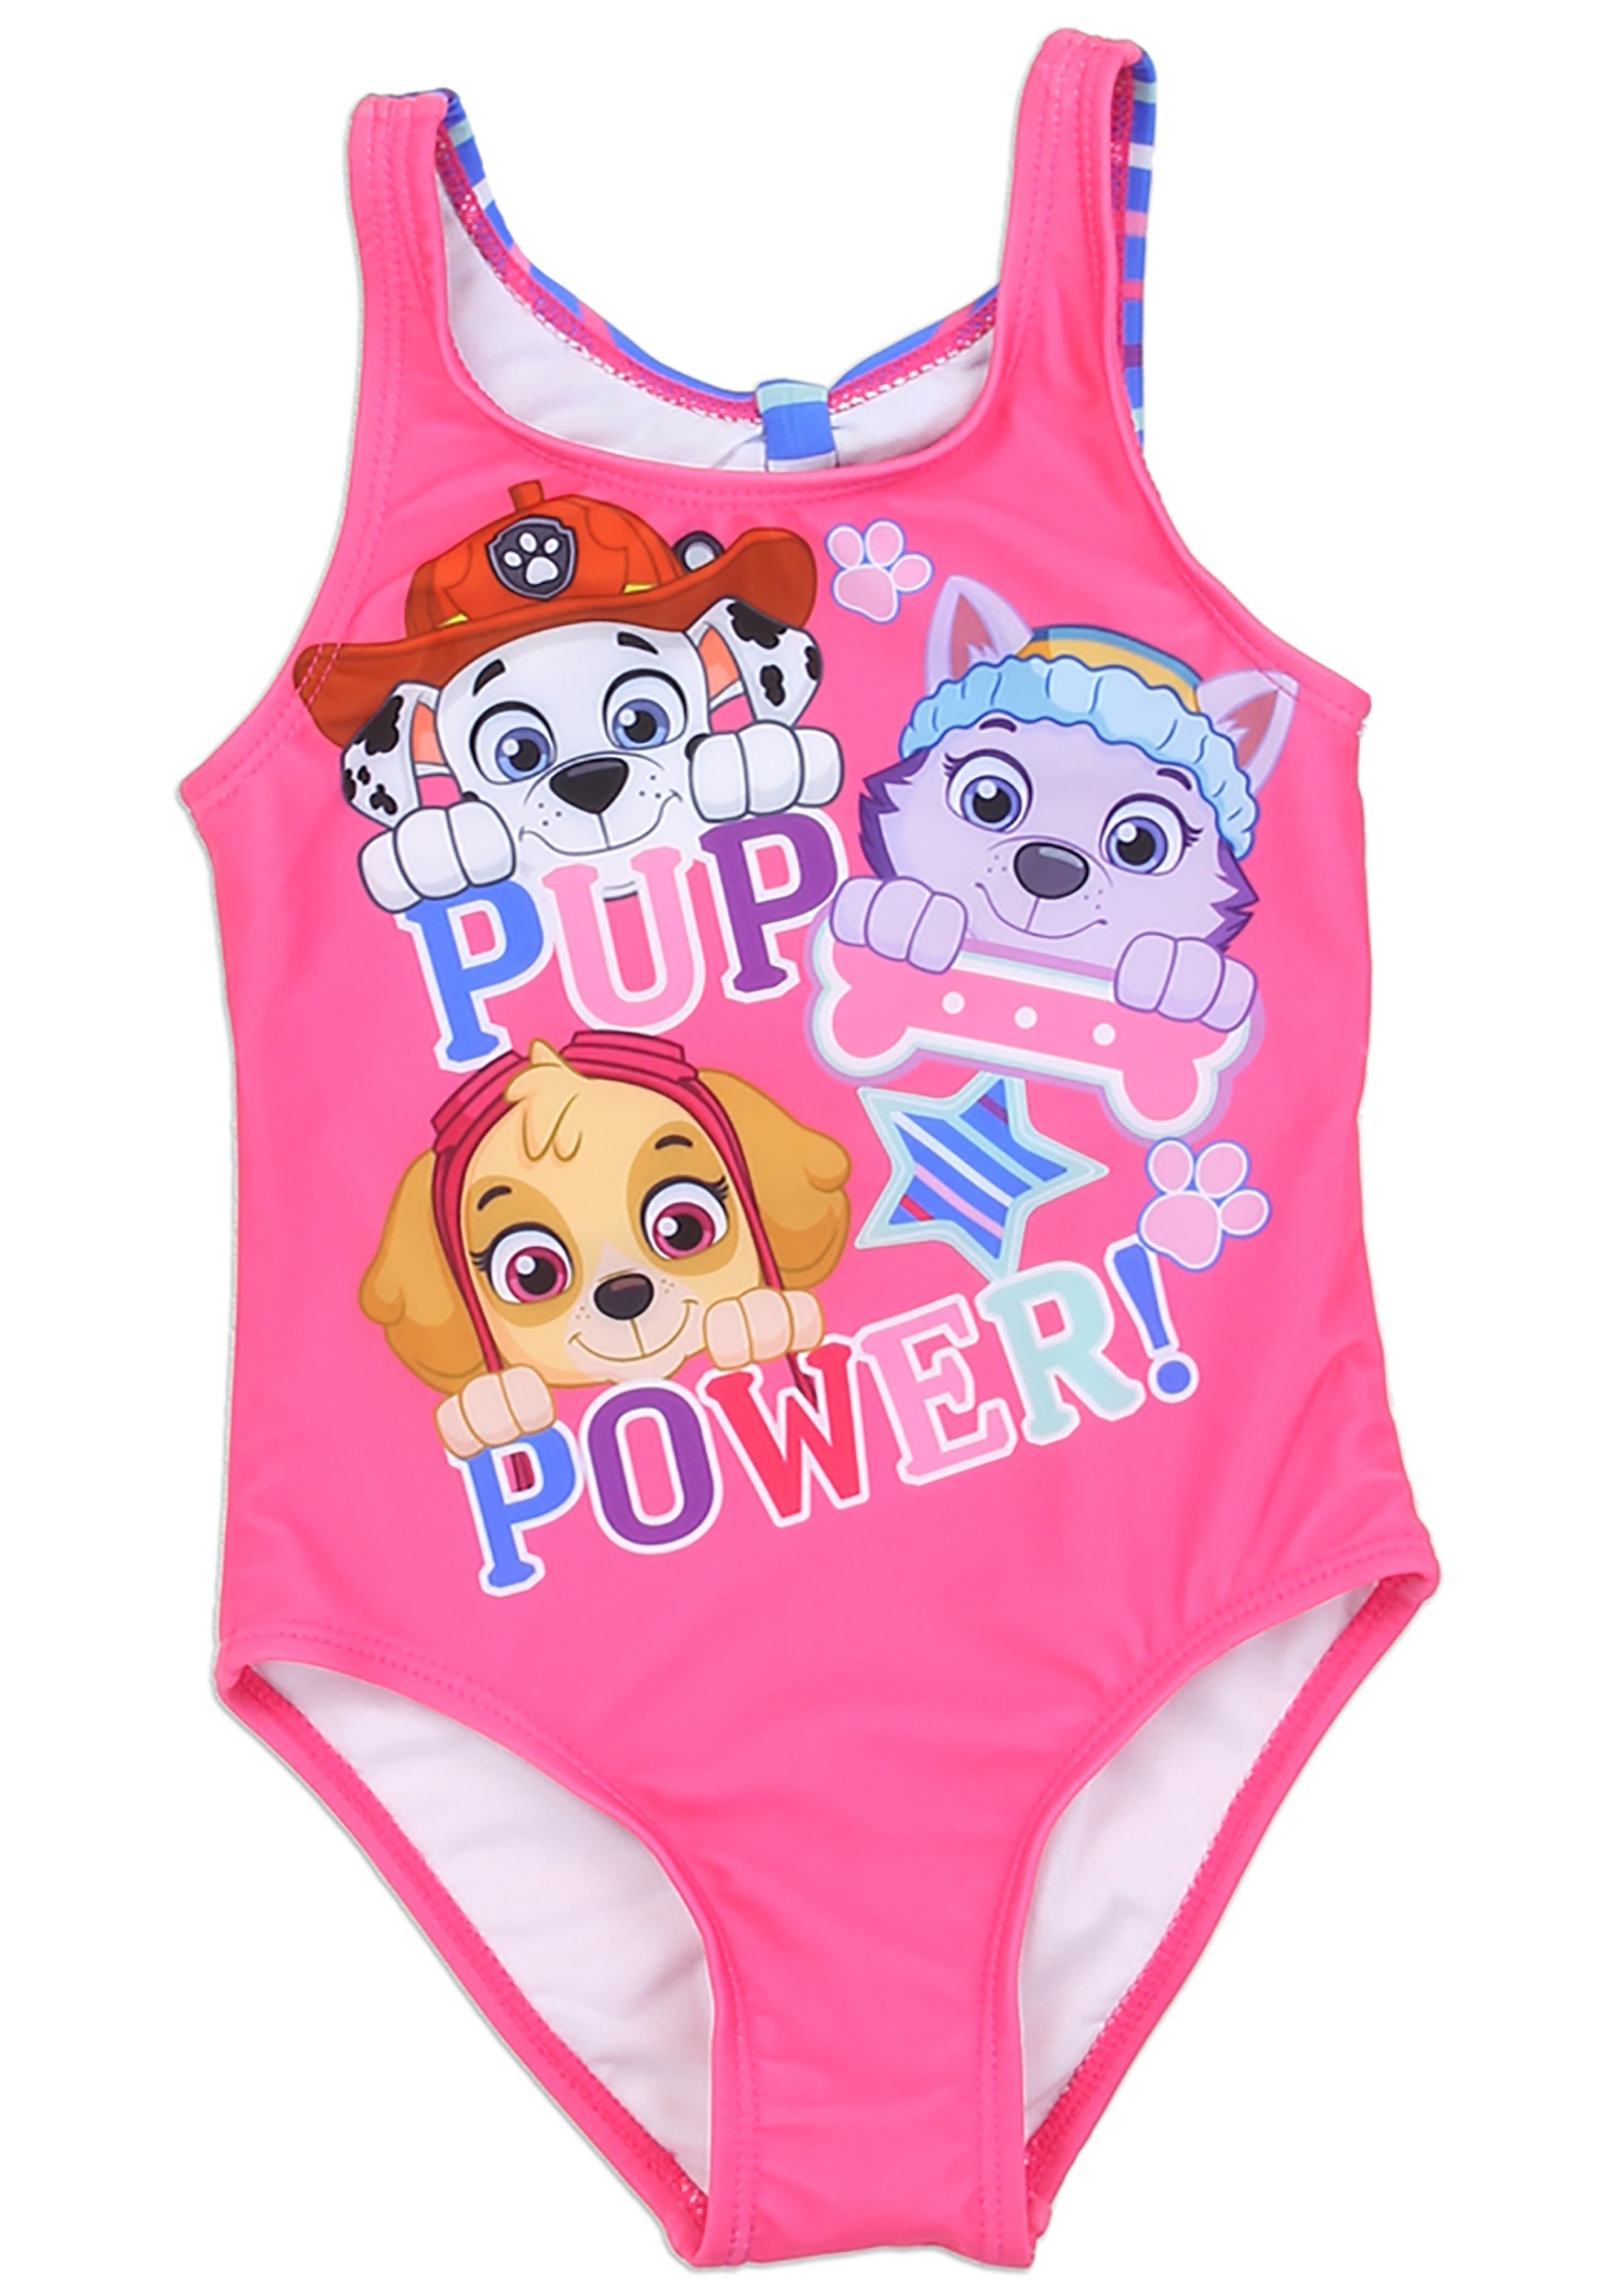 Nickelodeon Paw Patrol Swimsuit for Toddlers Girls 2-3T Skye! Blue & Pink 